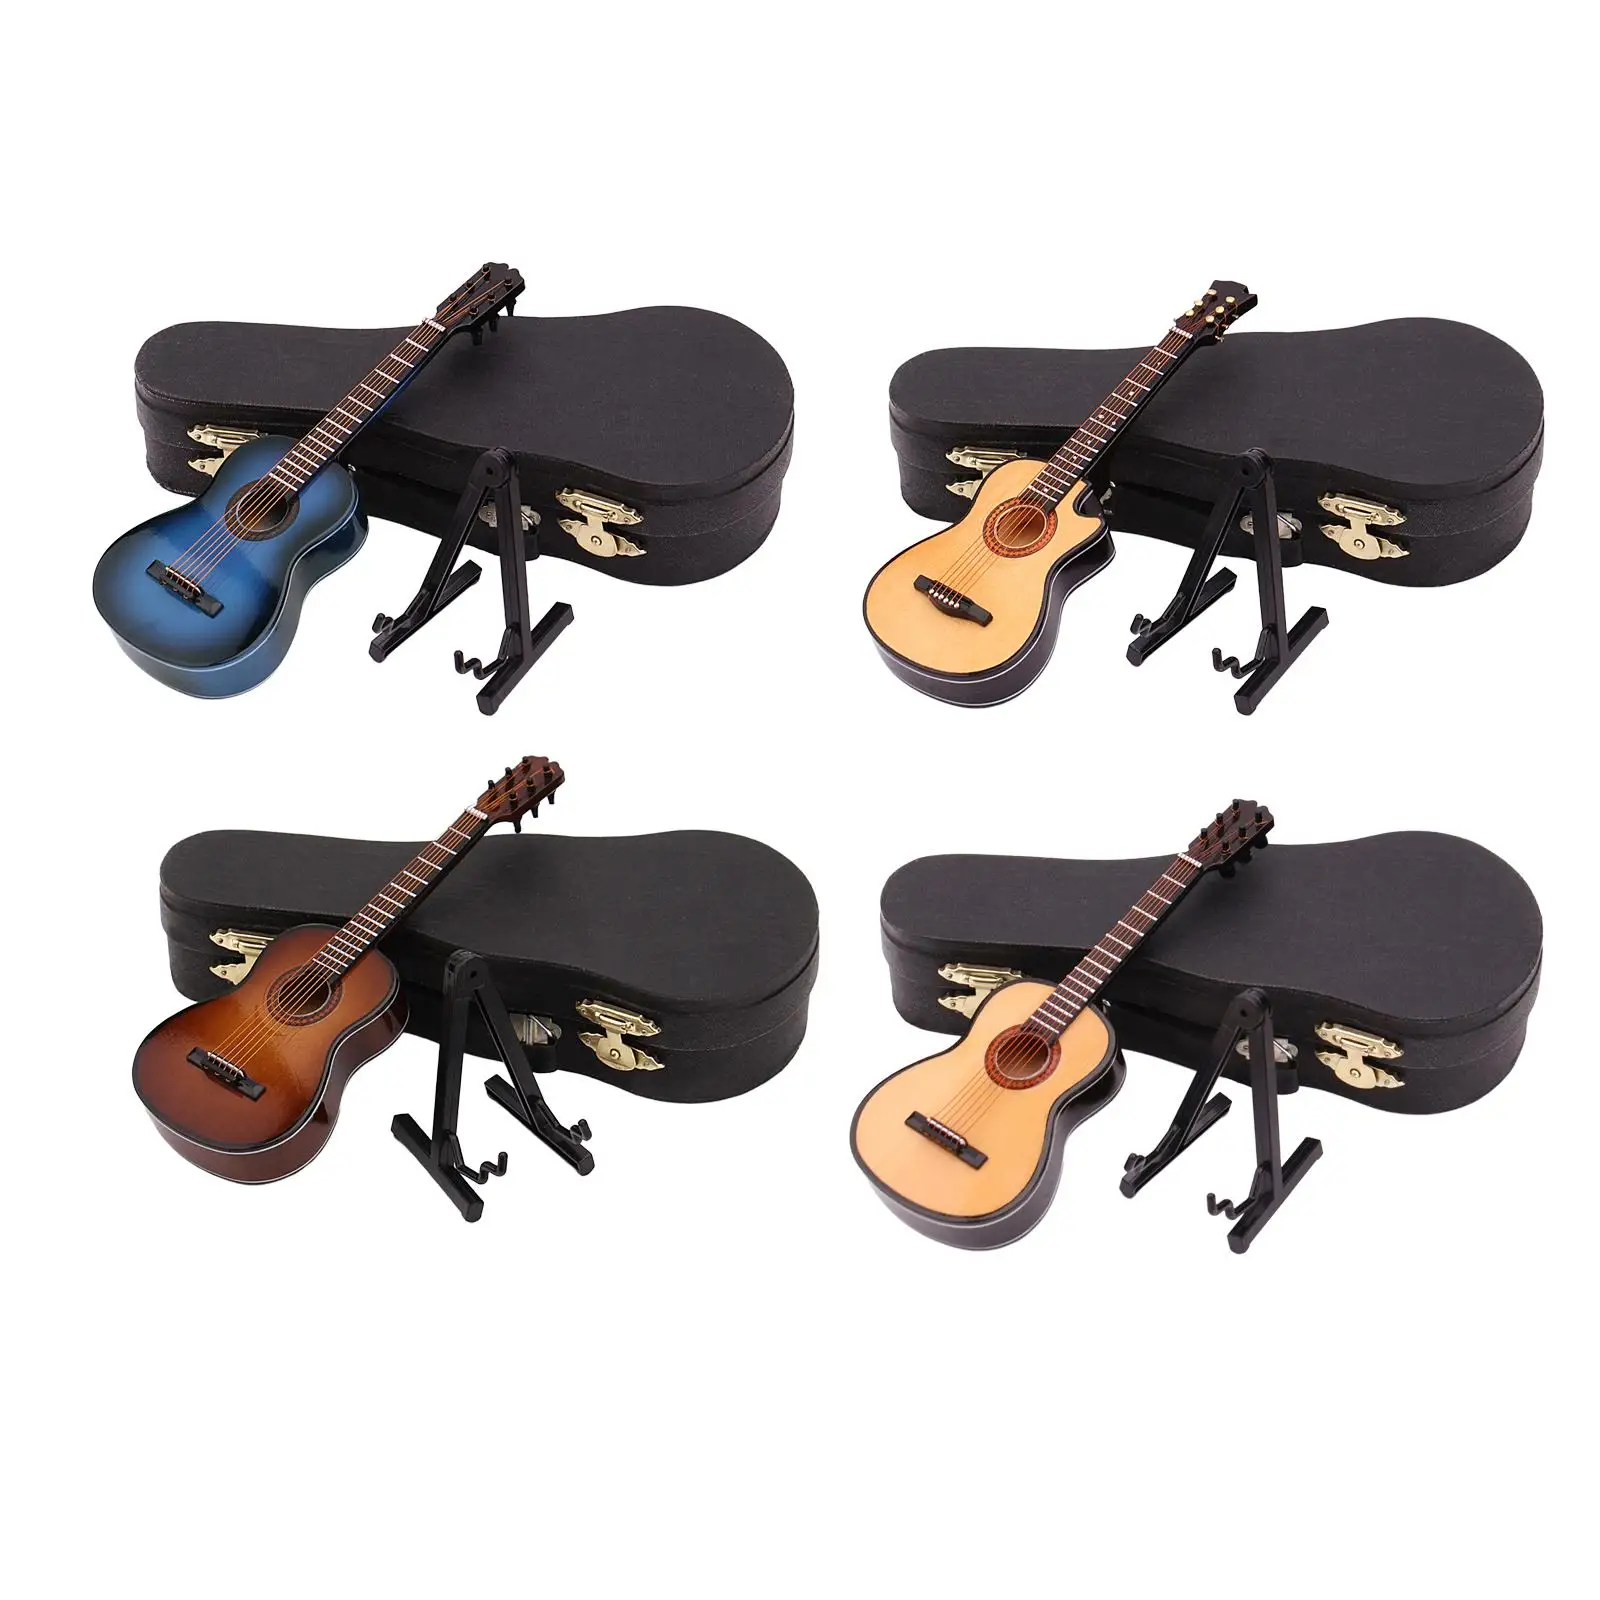 1:12 Scale Wooden Acoustic Guitar With A Case Tumdee Dolls House Instrument 562 